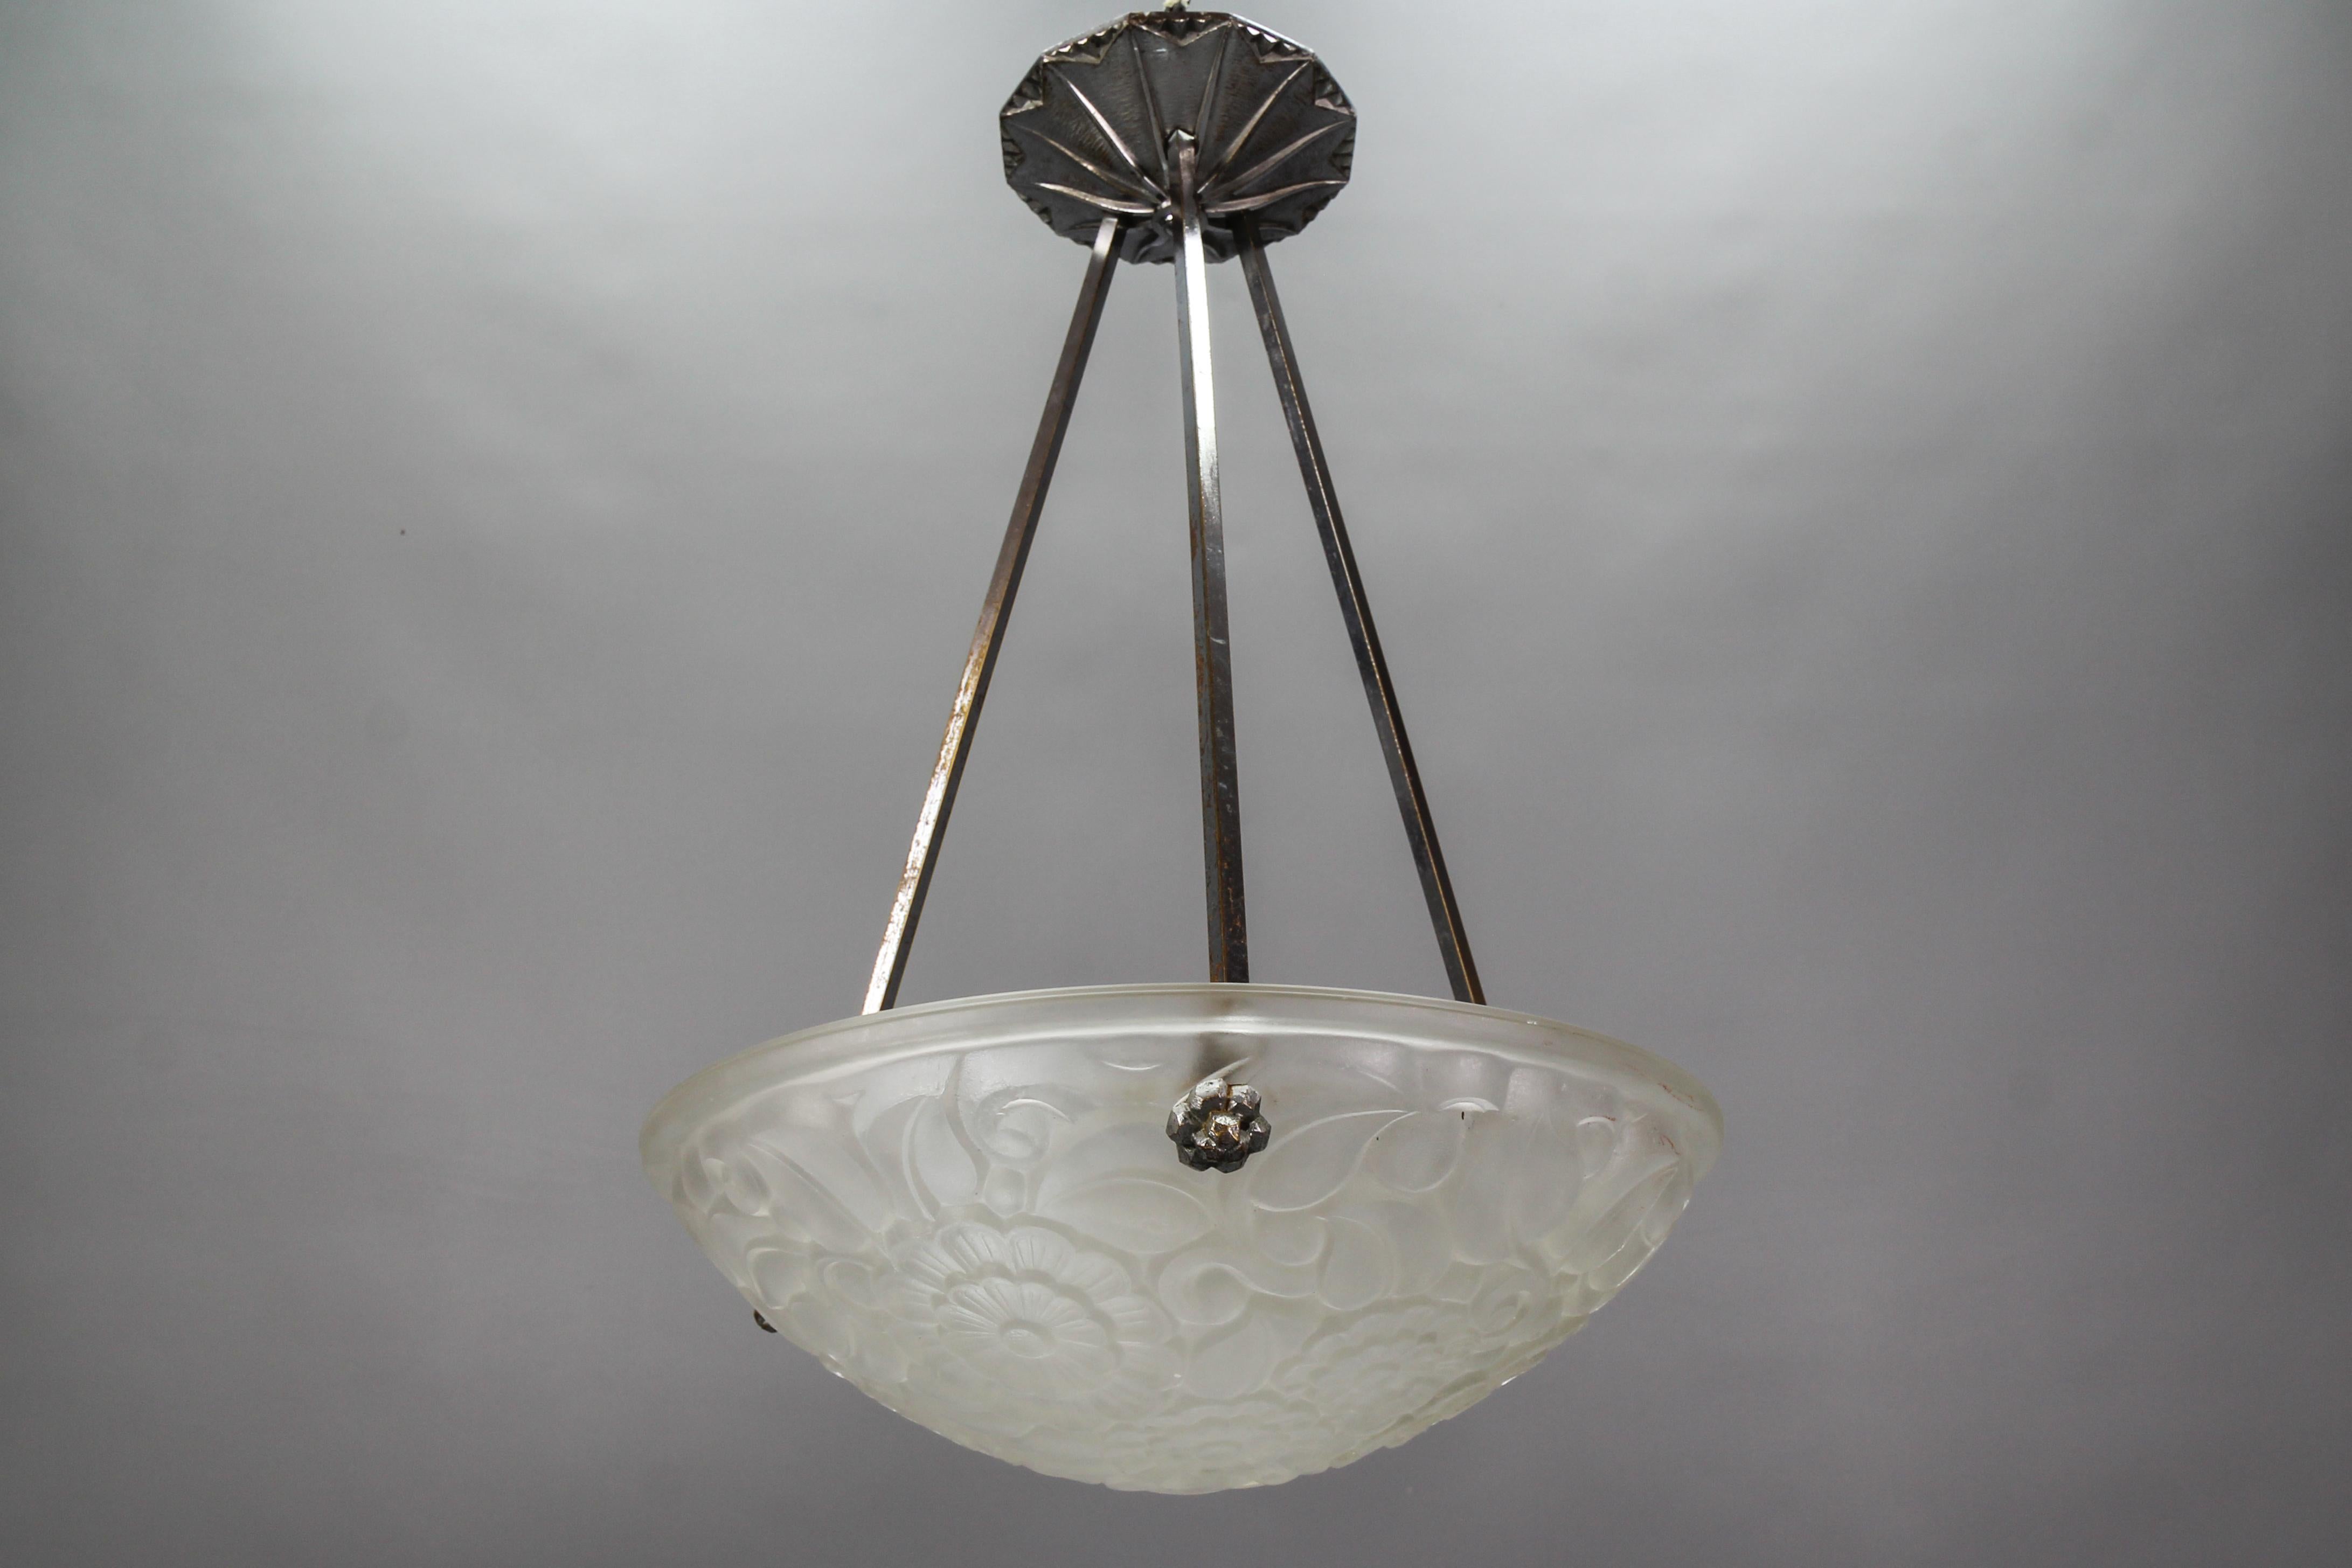 French Art Deco pendant light with a frosted clear glass lamp shade/bowl from the 1930s.
This beautiful clear frosted glass bowl features stylized flower motifs, marked on the edge 